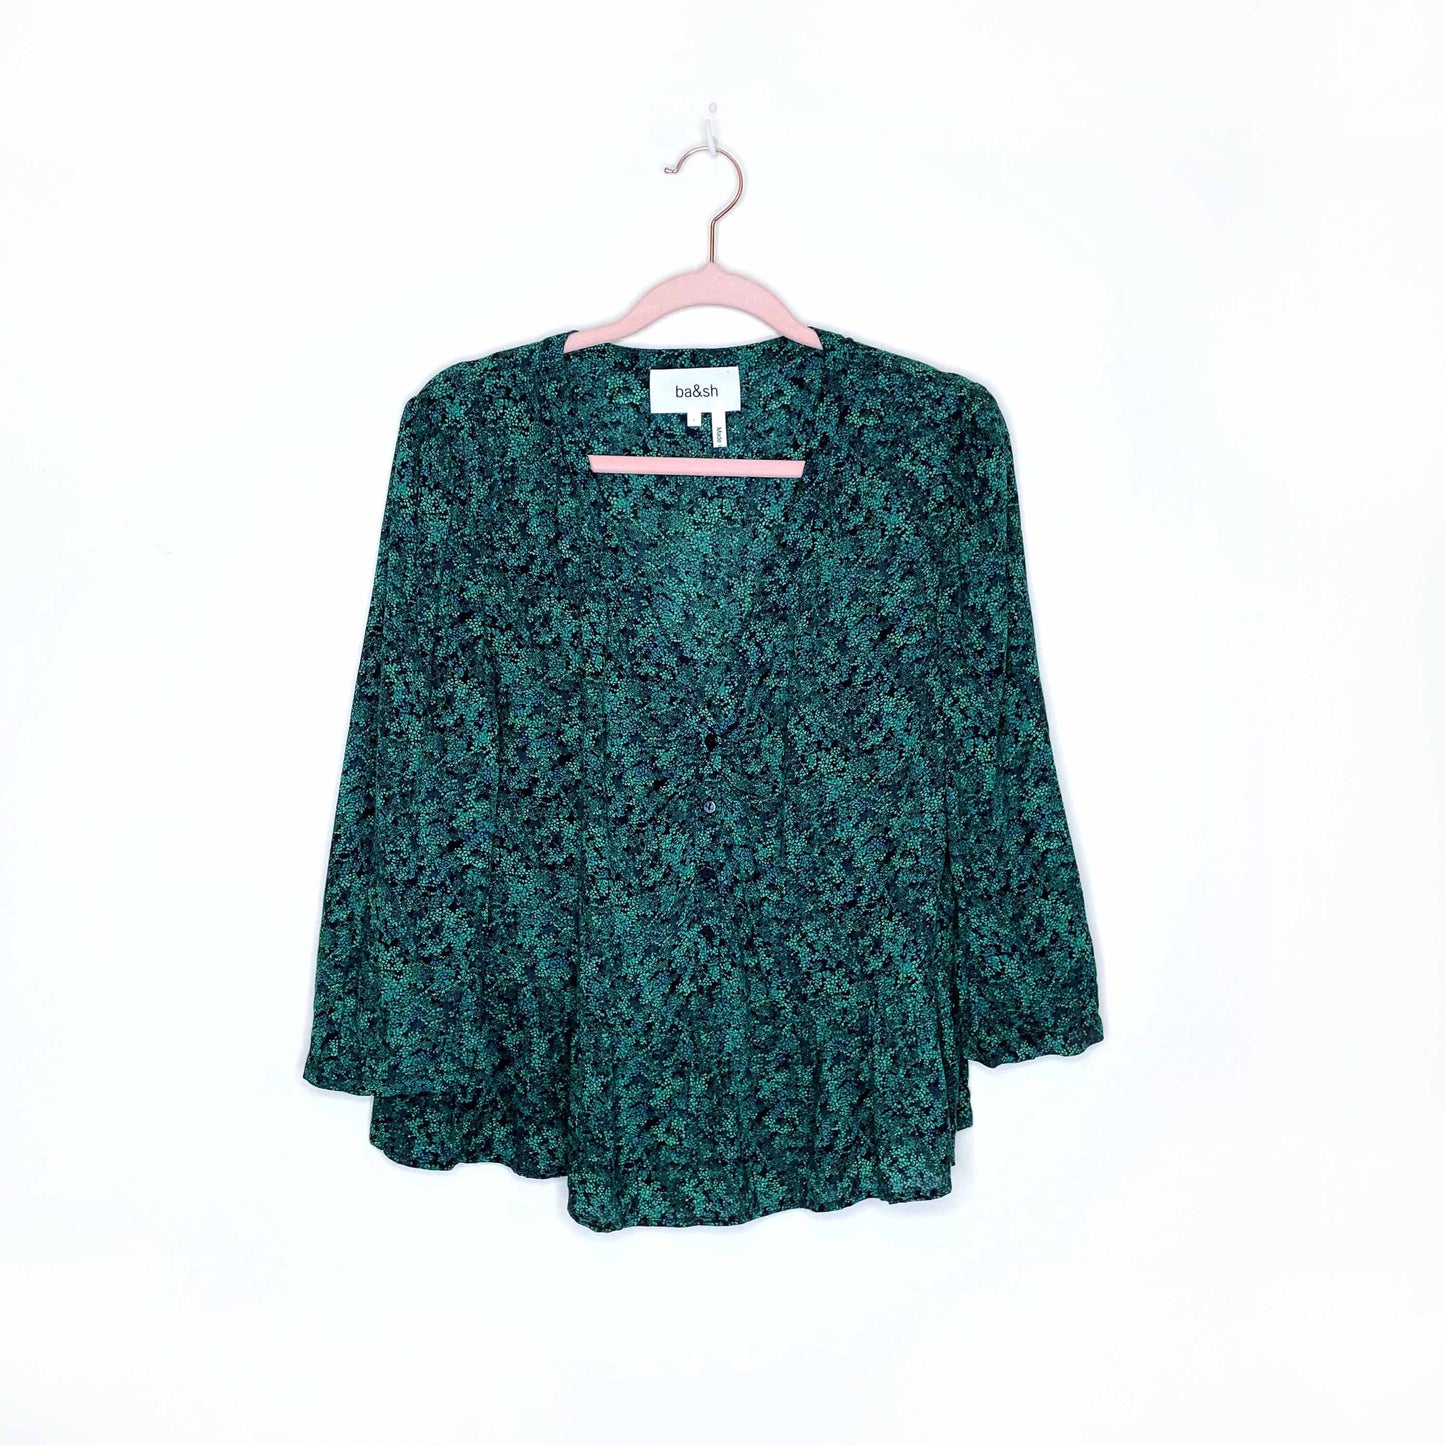 ba&sh nelly top vert floral peasant blouse - size large